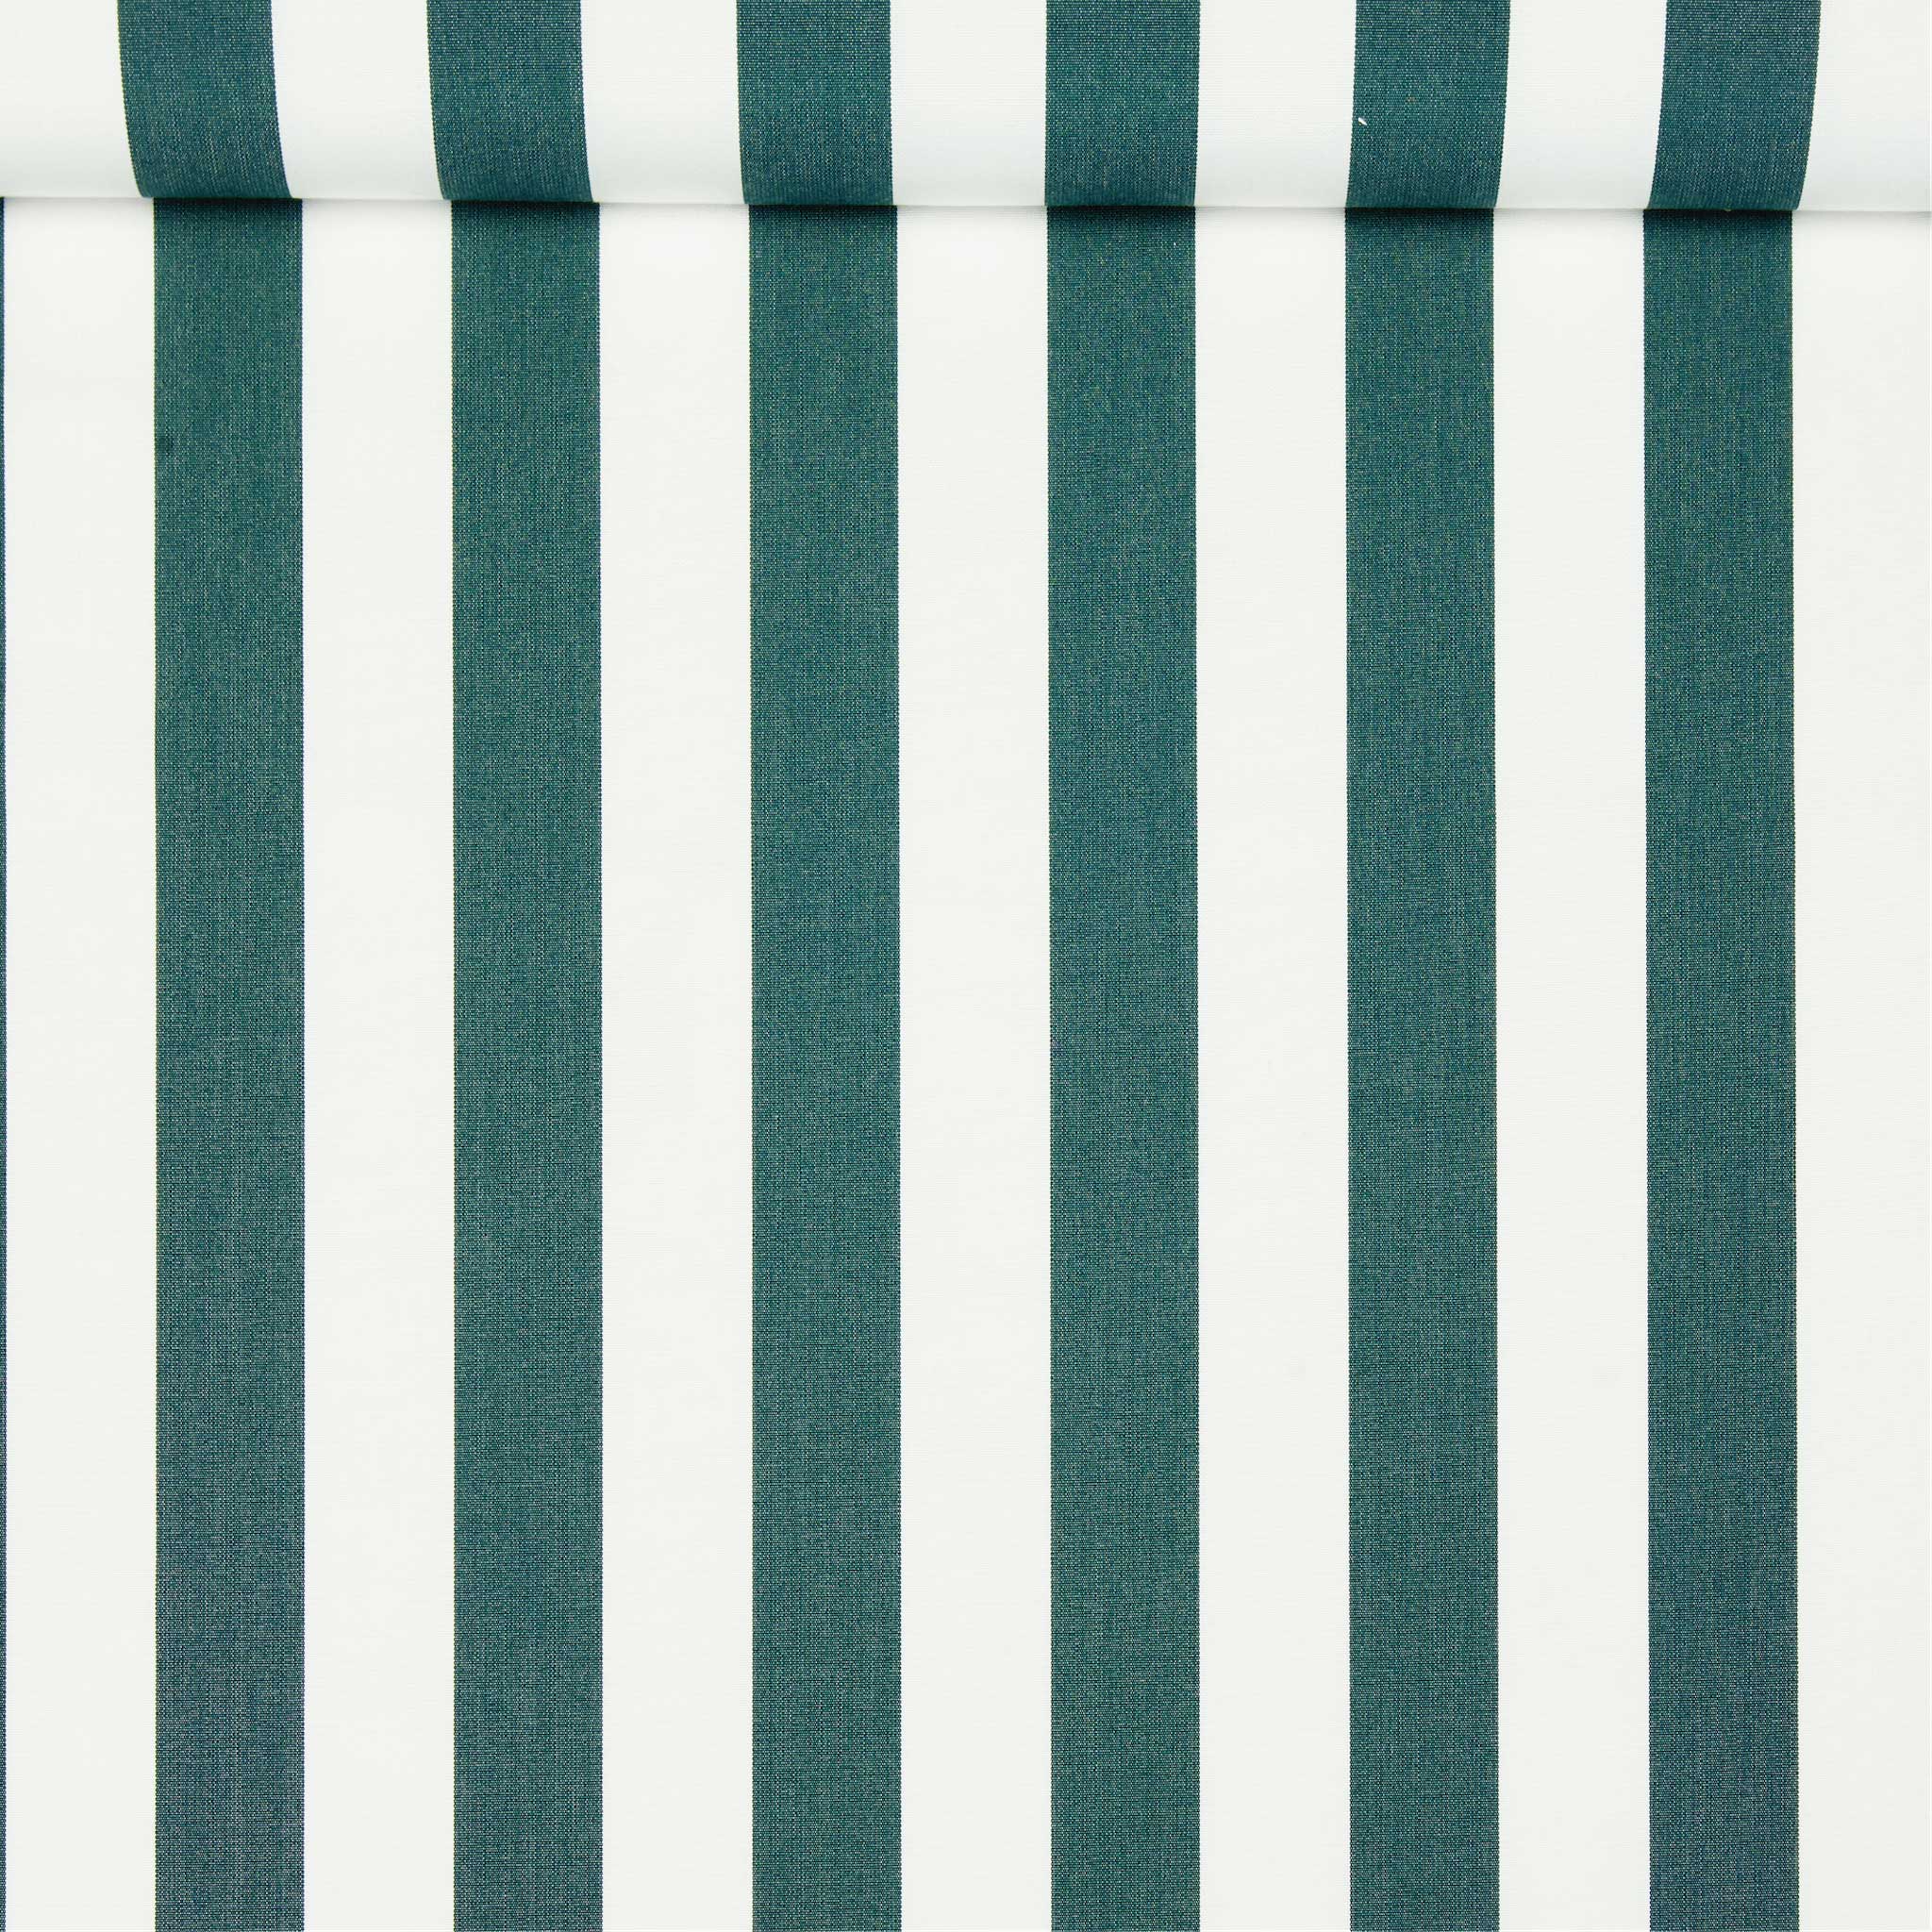 A green and white striped solution dyed acrylic fabric used for luxury pool floats.